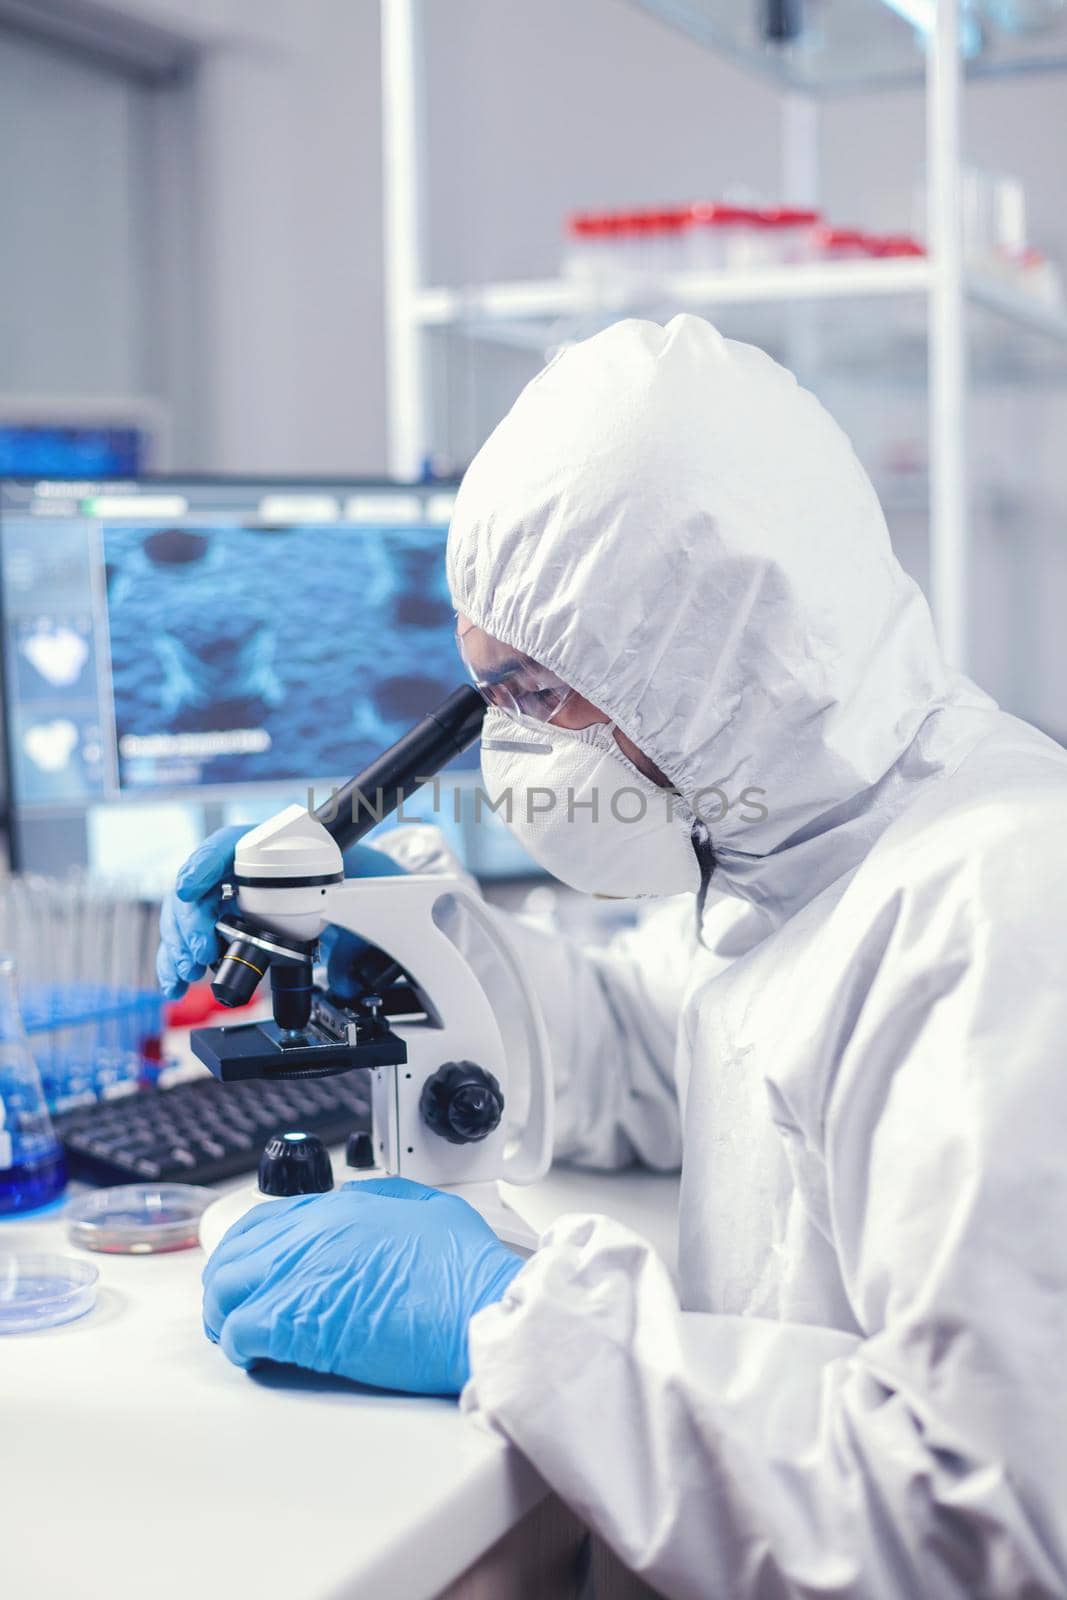 Scientist using modern laboratory equipment dressed in protection against covid19. Virolog in coverall during coronavirus outbreak conducting healthcare scientific analysis.